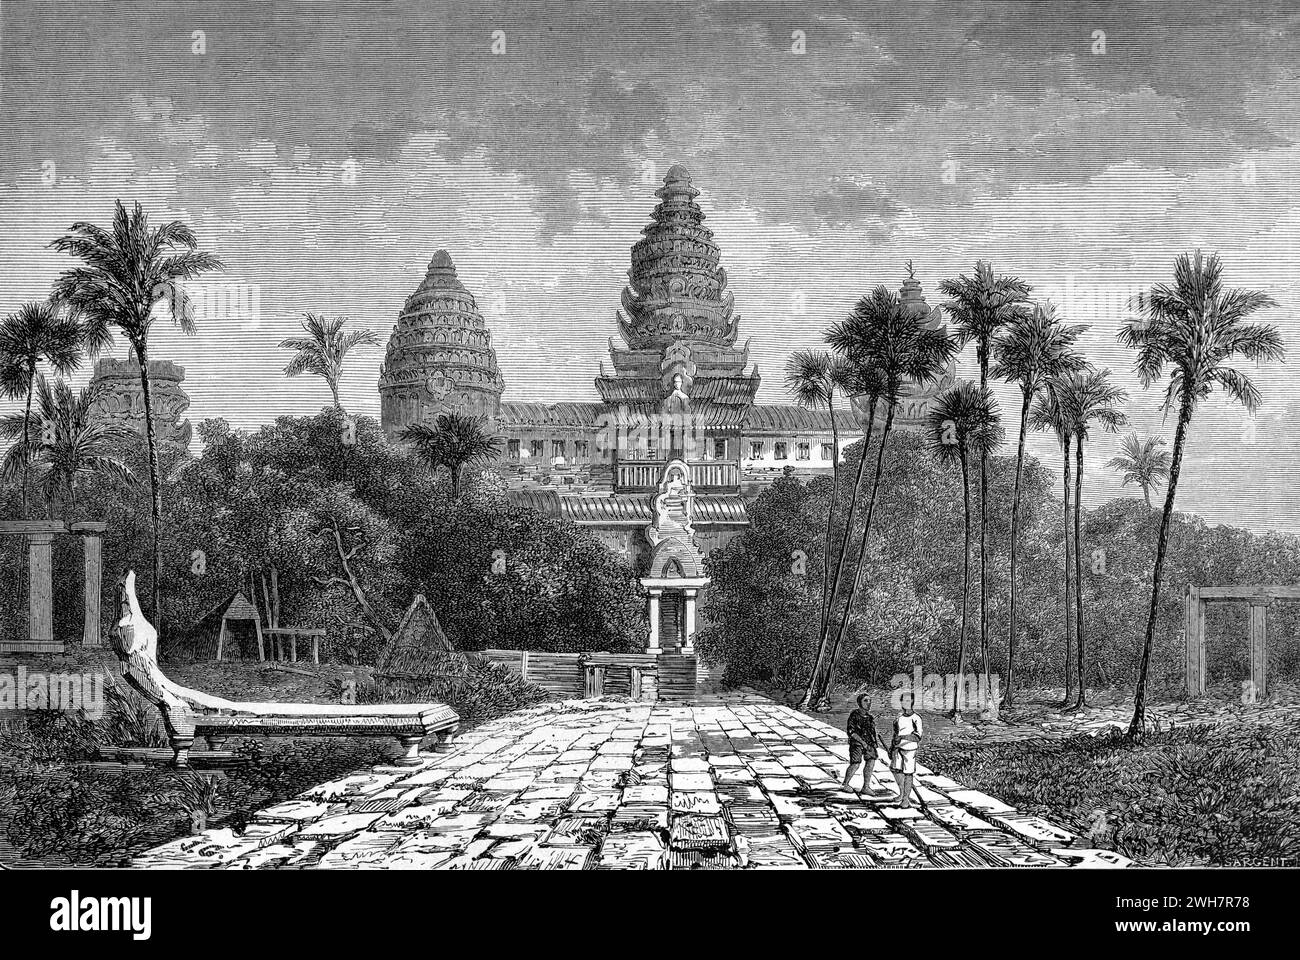 Main Entrance to Angkor Wat, the City of Temples, a Hindu-Buddhist Temple Complex, Angkor Cambodia. Vintage or Historic Engraving or Illustration 1863 Stock Photo